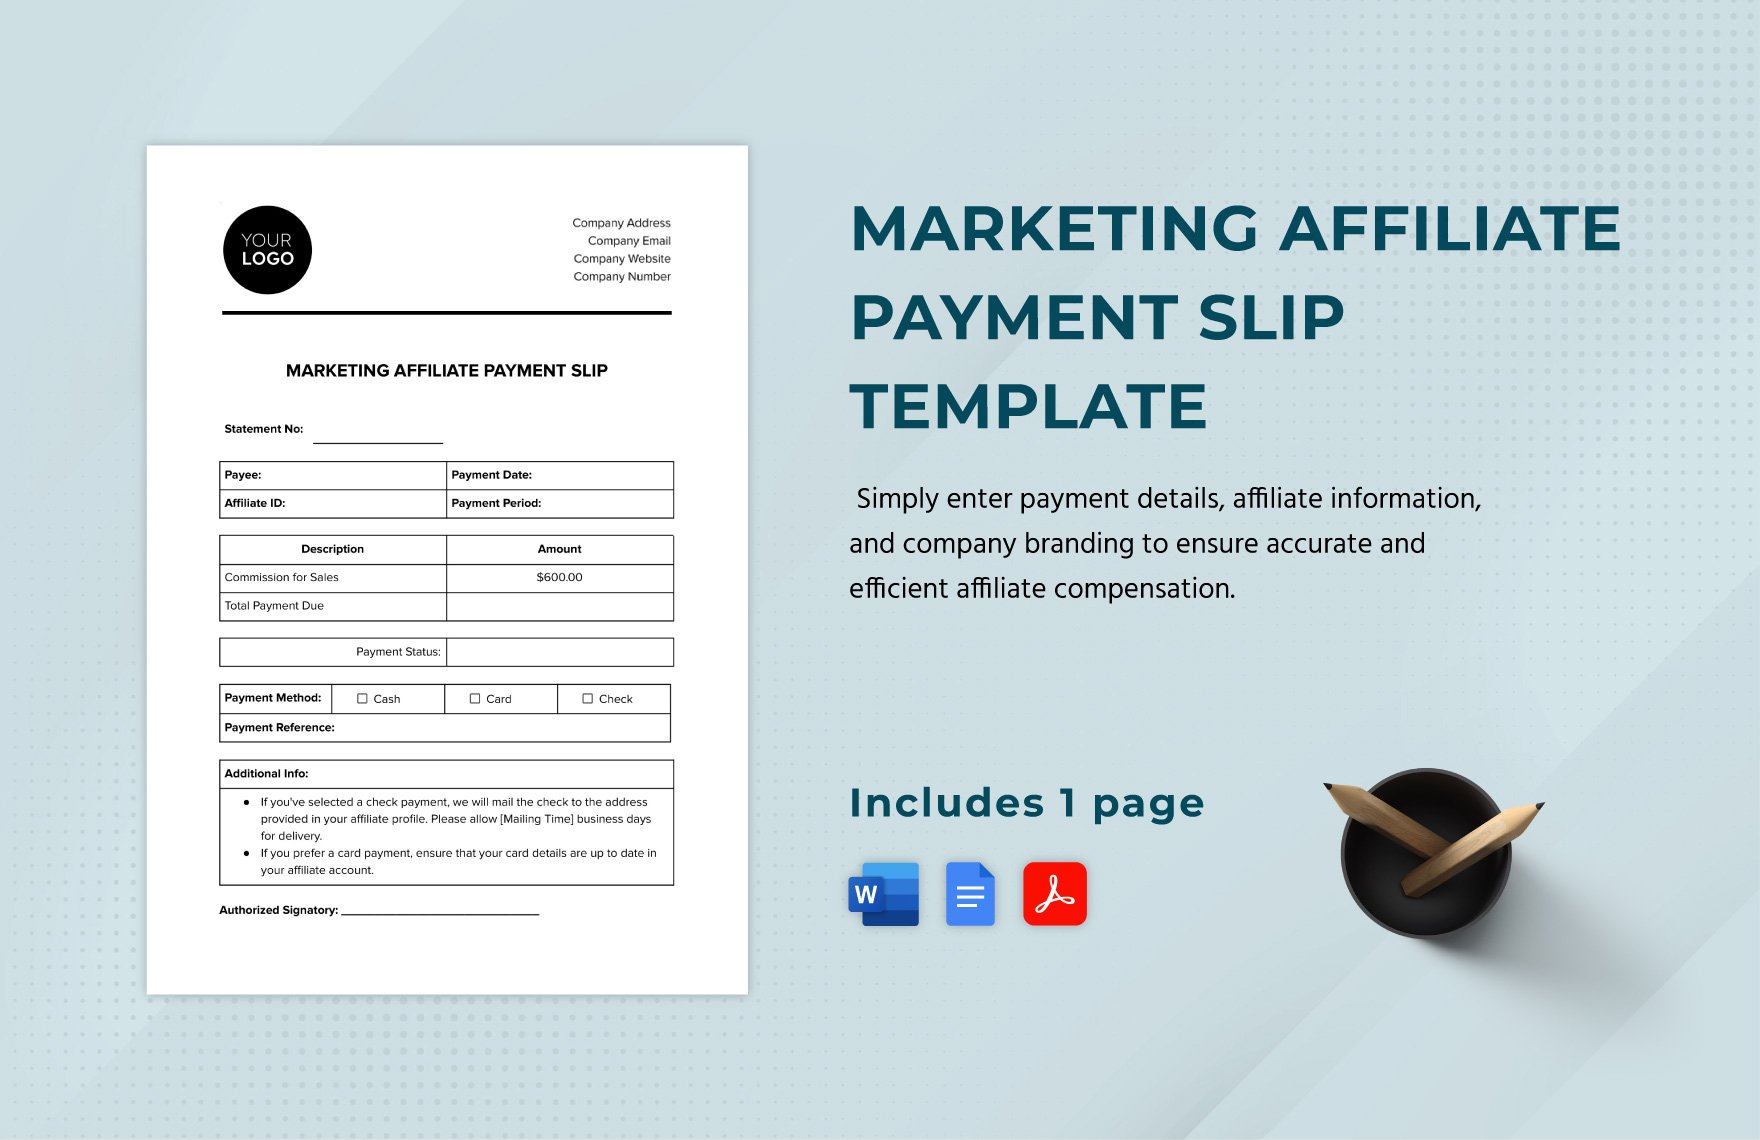 Marketing Affiliate Payment Slip Template in Word, Google Docs, PDF